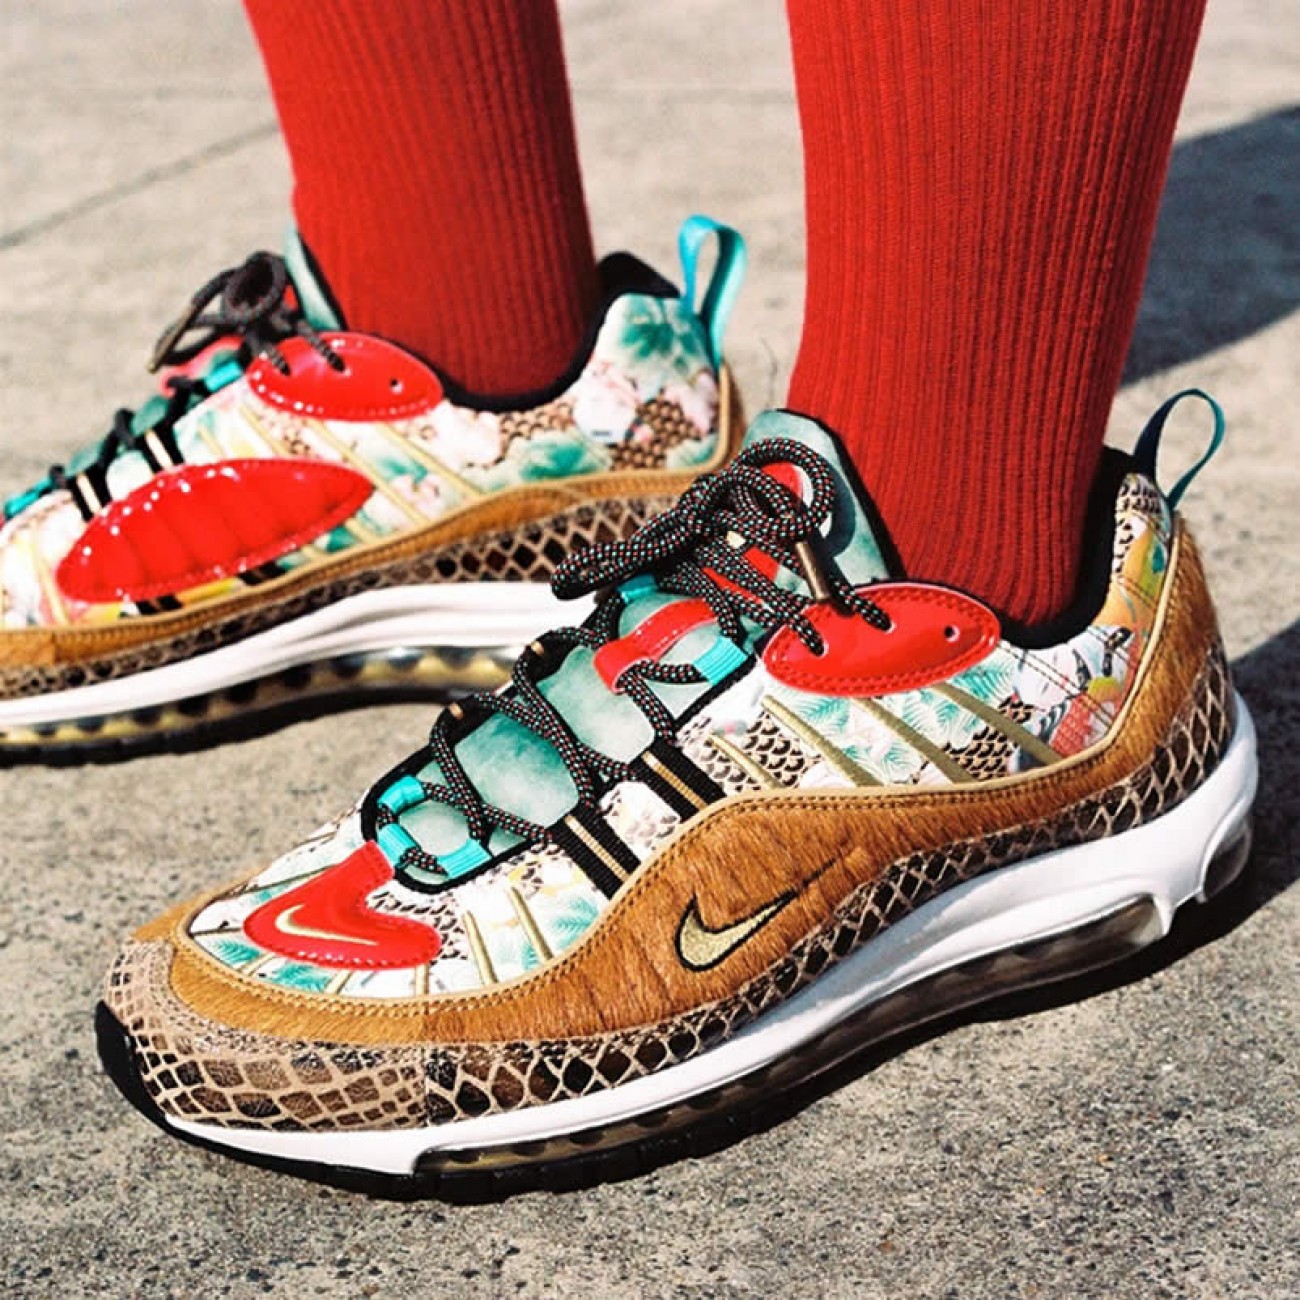 Nike Air Max 98 "Chinese New Year" TianJin Print CNY 2019 For Sale BV6649-708